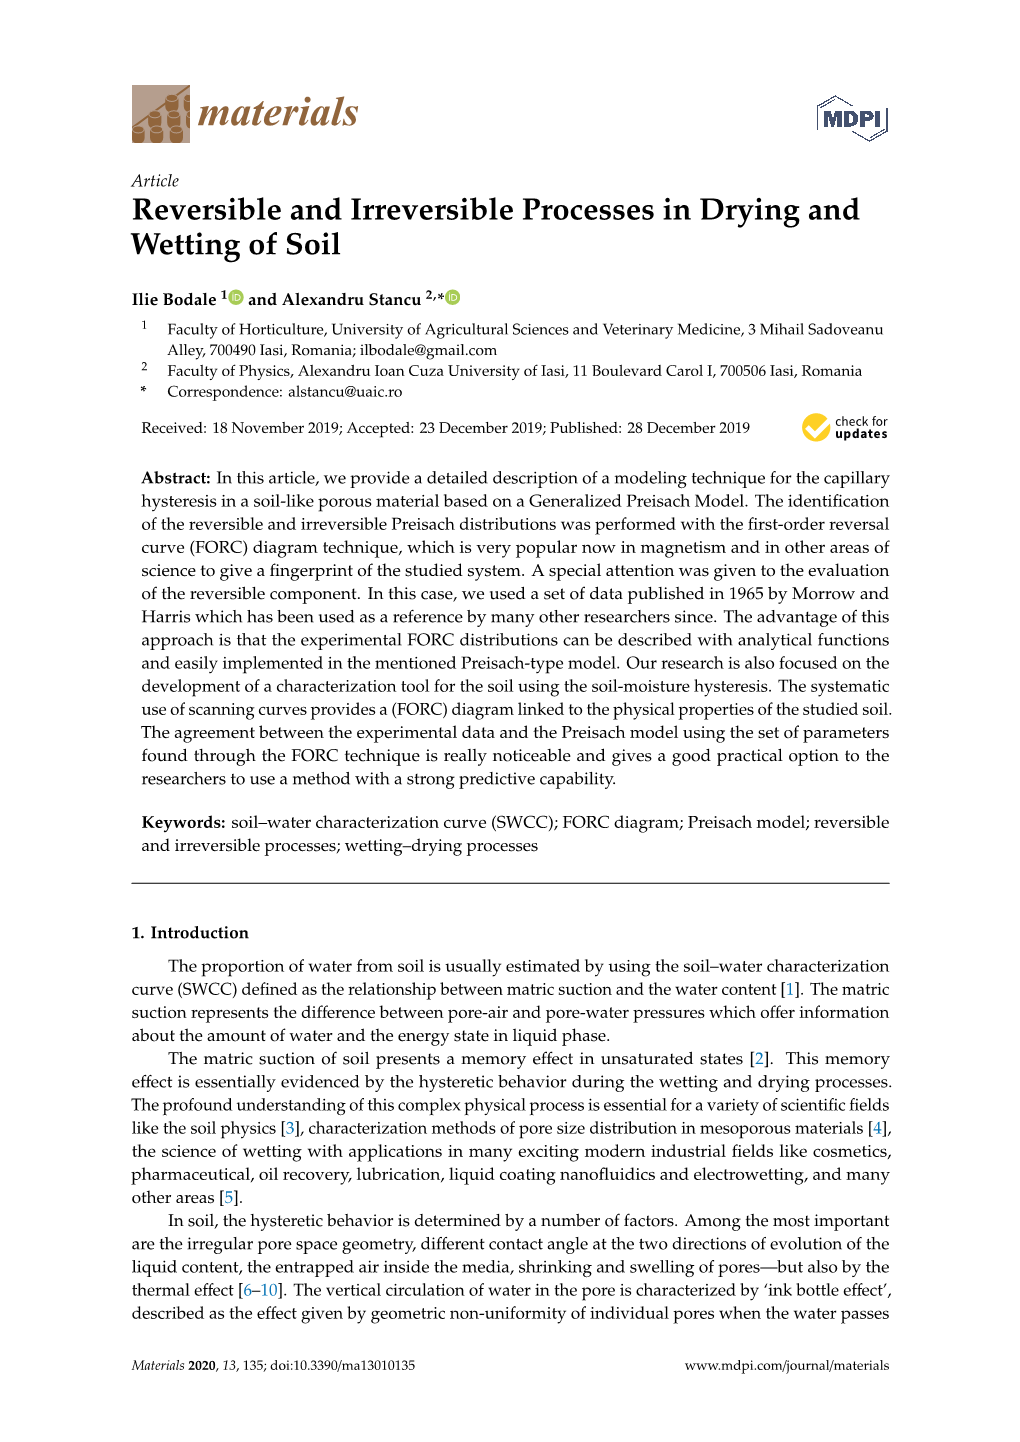 Reversible and Irreversible Processes in Drying and Wetting of Soil